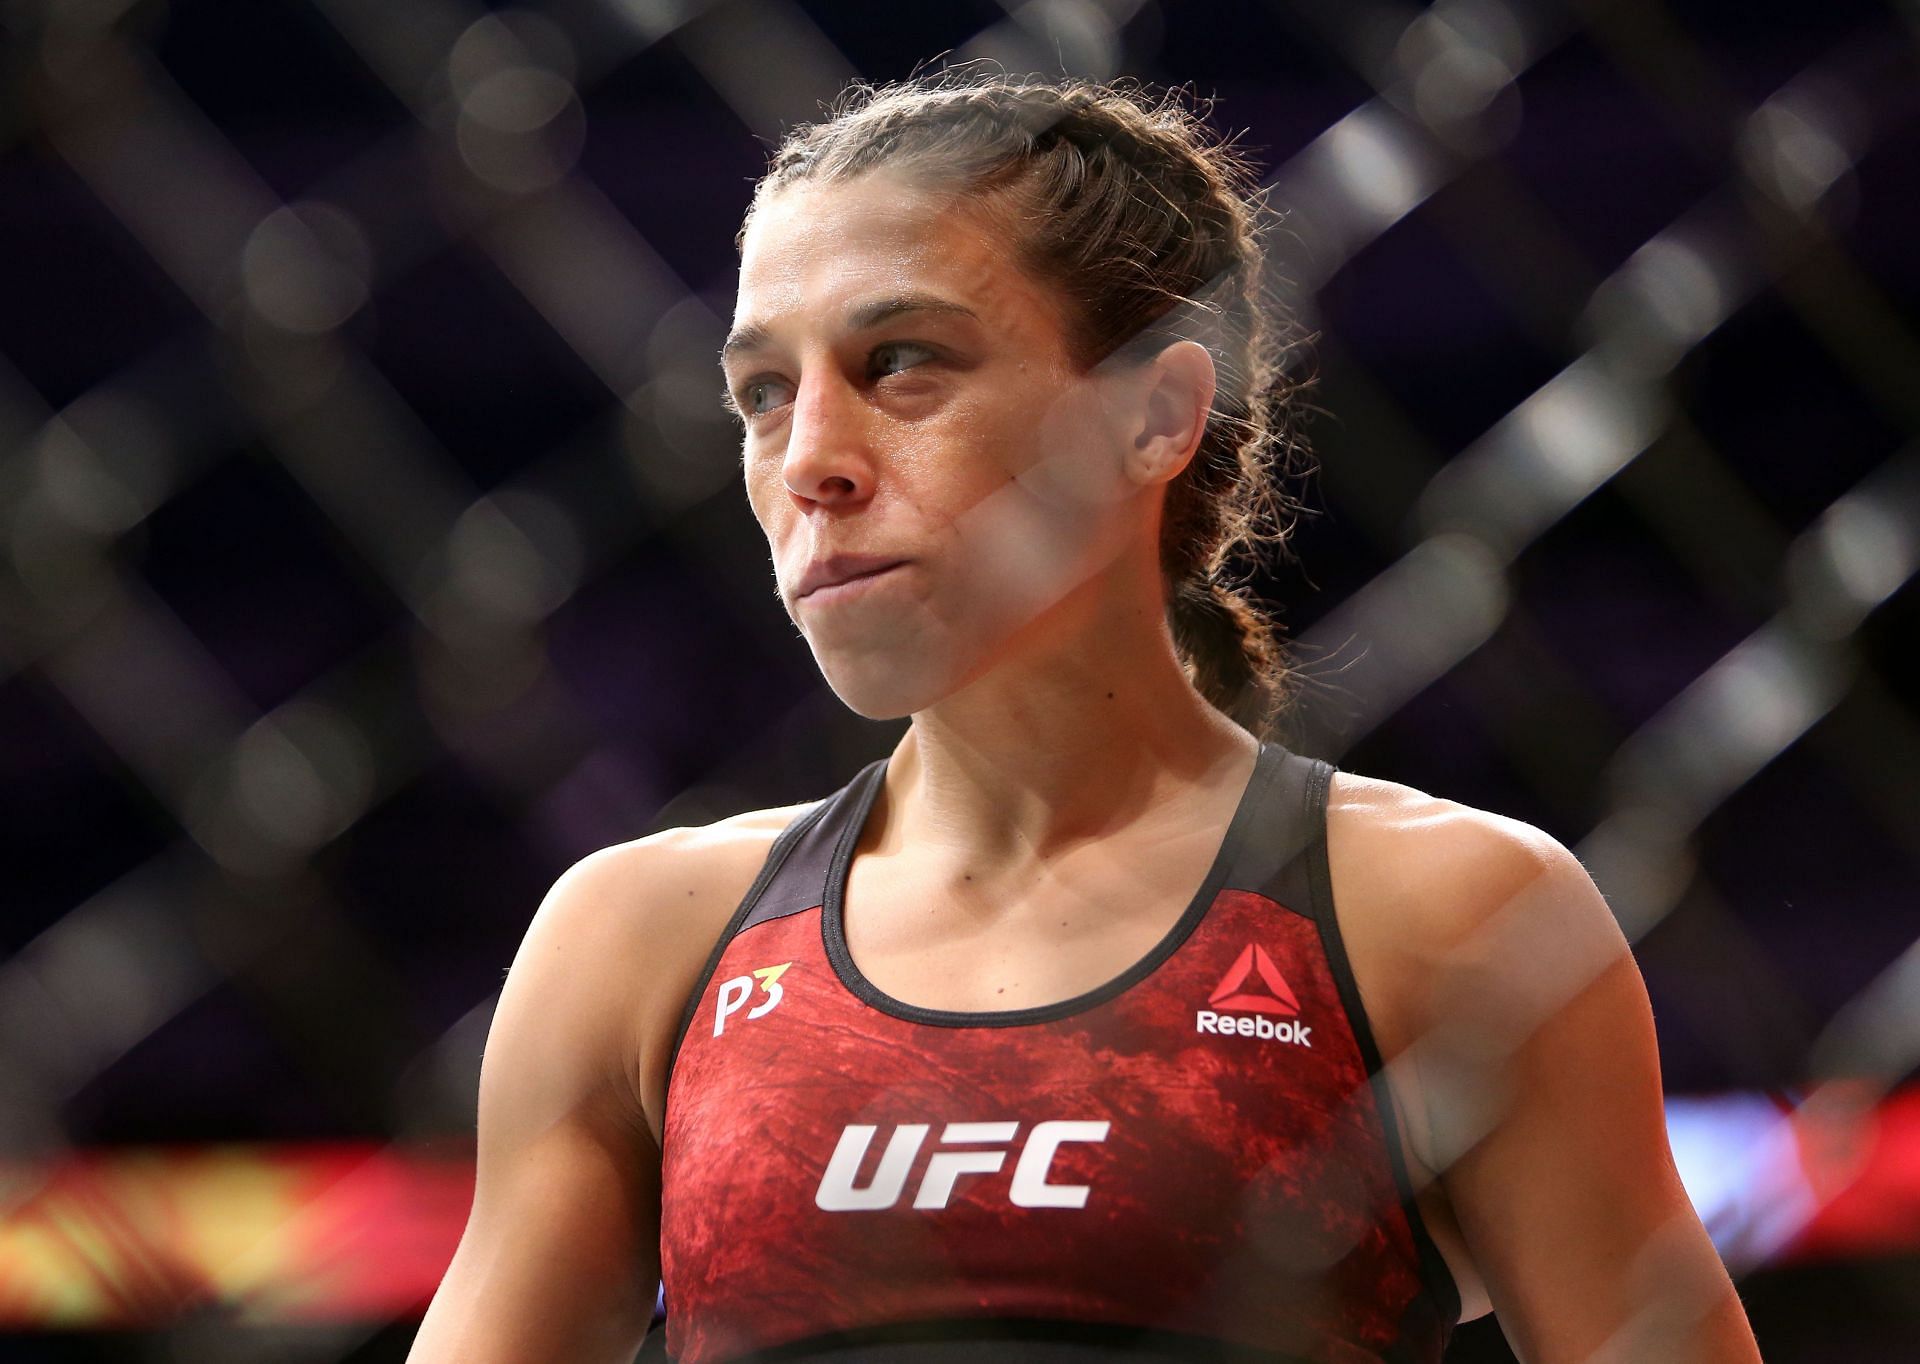 Joanna Jedrzejczyk last competed on March 7 2020